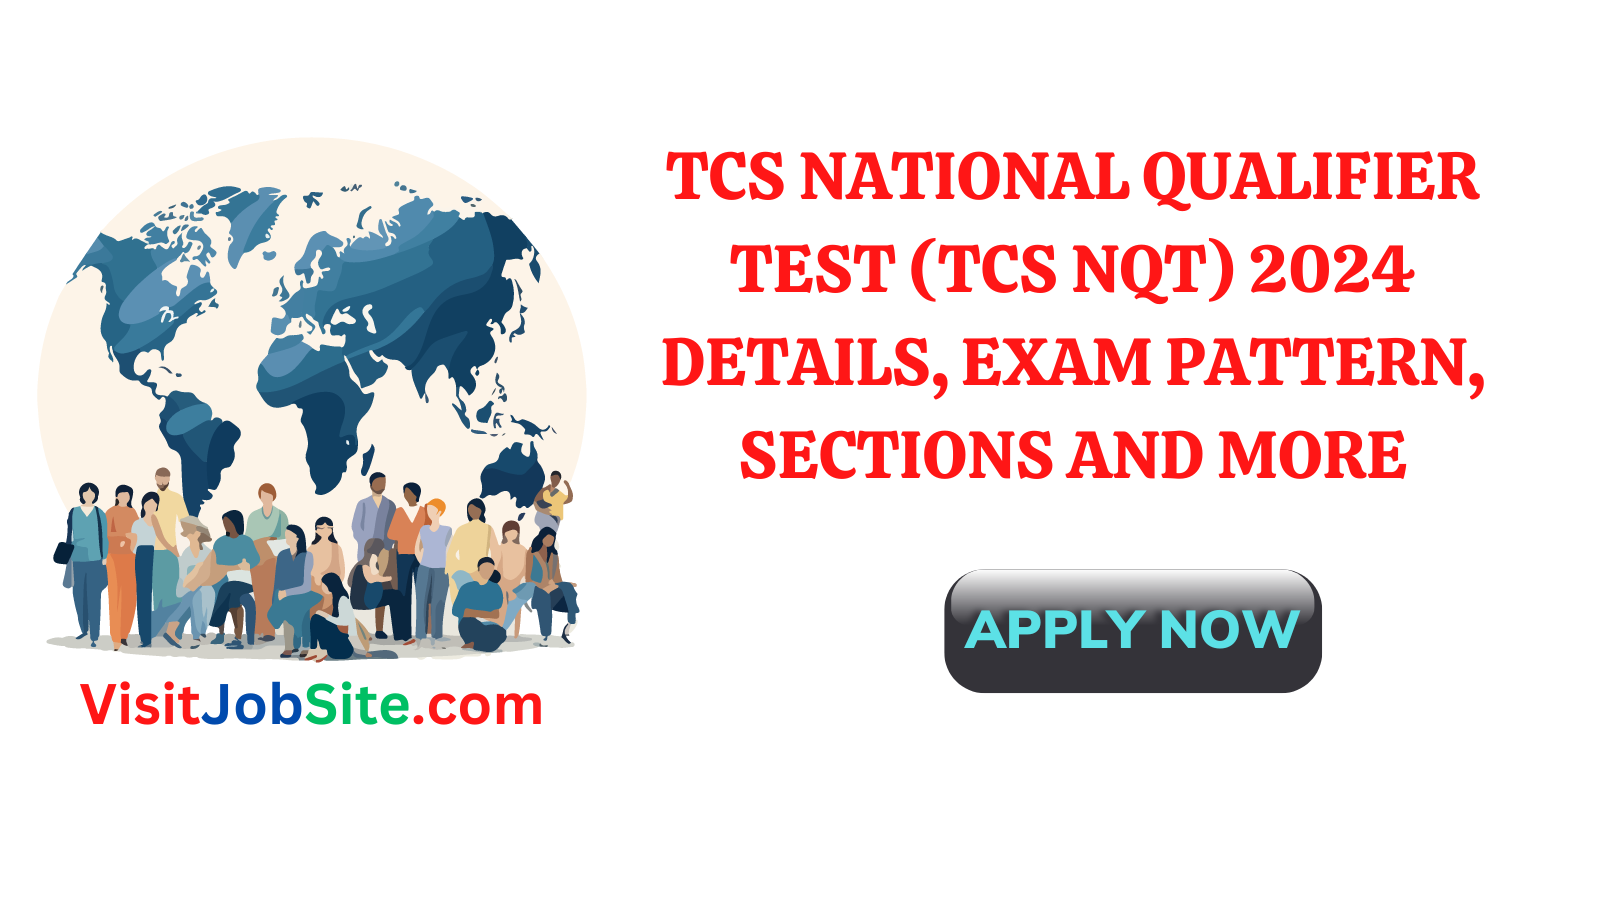 TCS National Qualifier Test (TCS NQT) 2024 Details, Exam Pattern, Sections and more